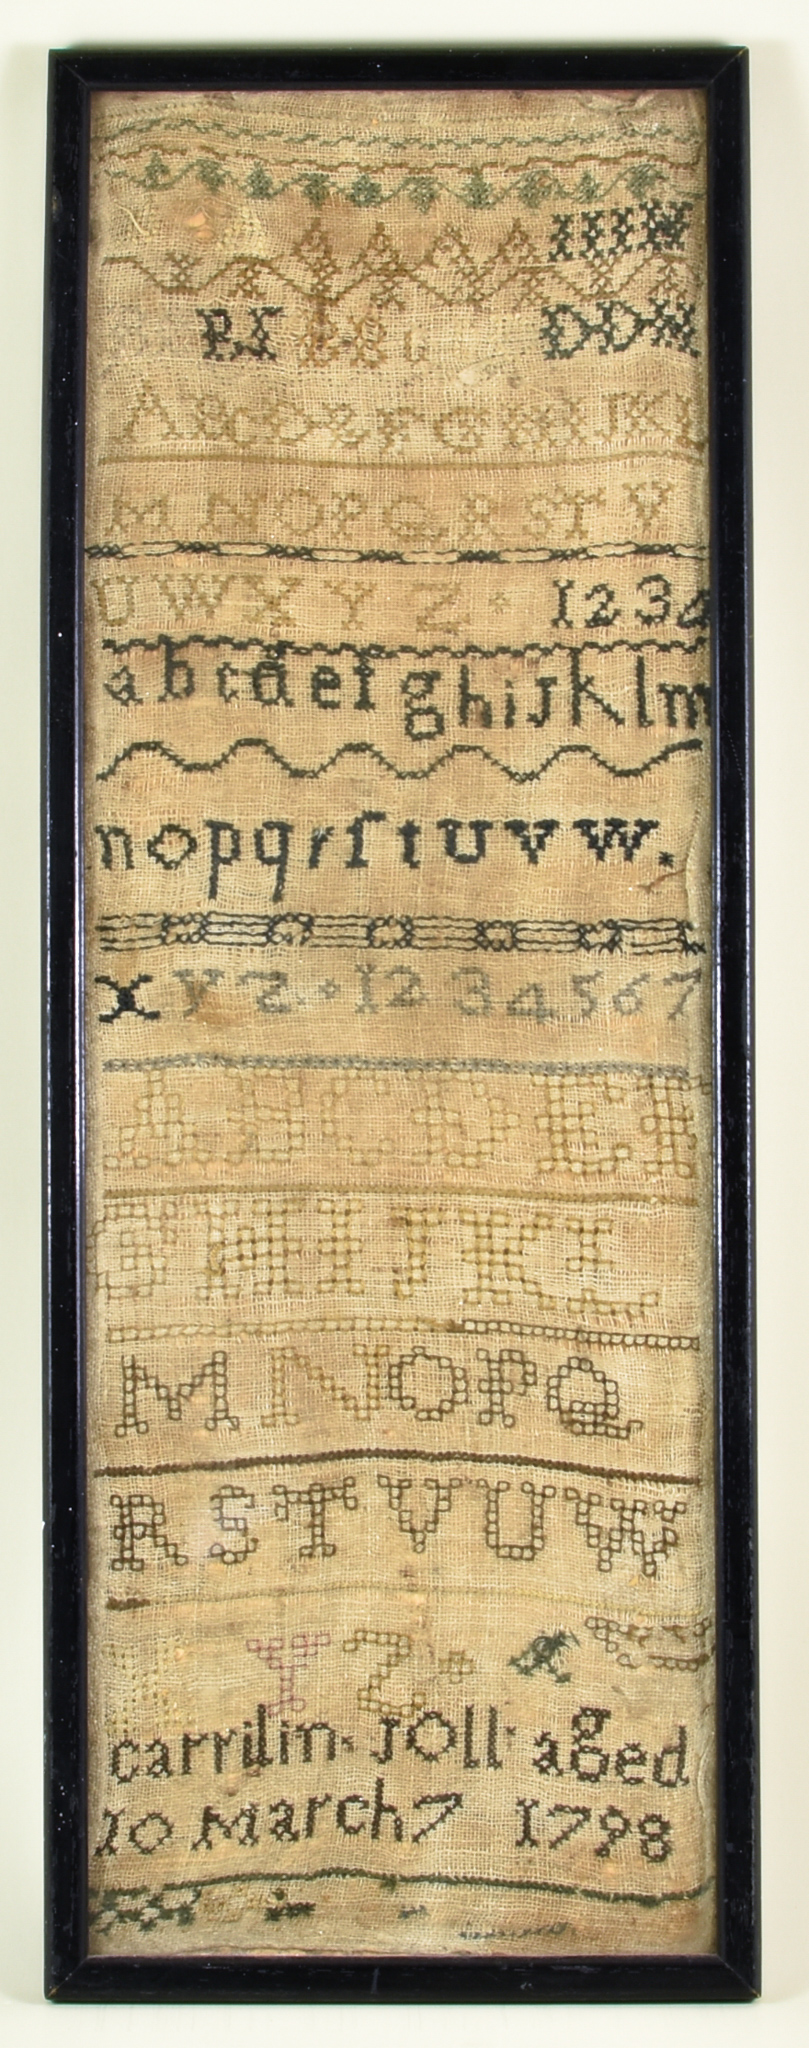 An English Sampler, worked in coloured silks by Carrilin Joll, dated 1798, with bands of alphabet